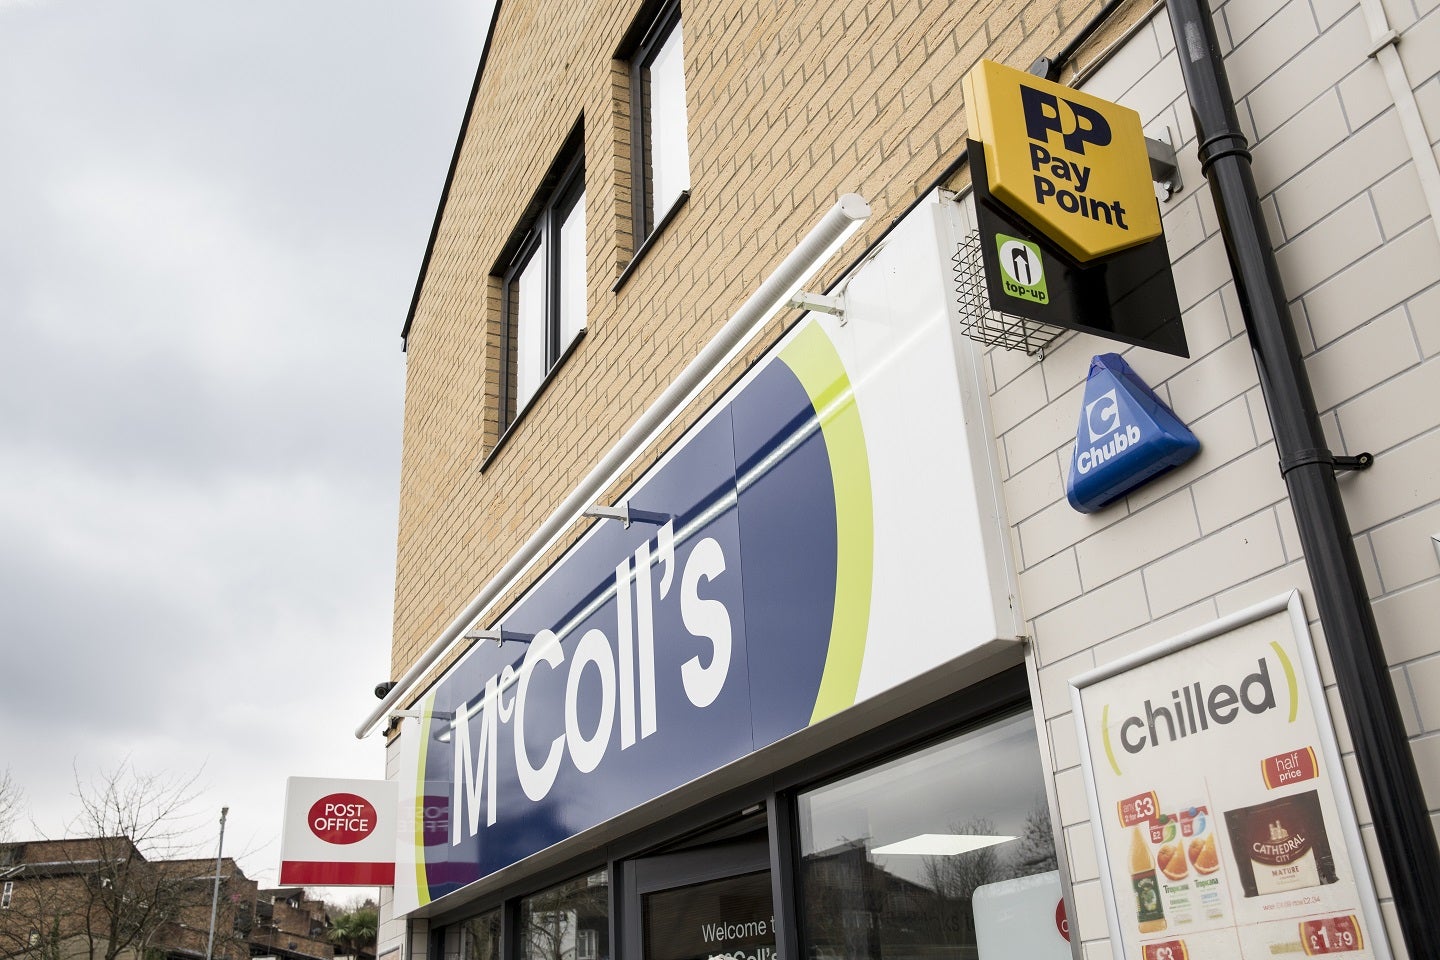 The 120-year-old McColl’s has struggled financially in recent years after witnessing soaring costs due to supply chain disruption, inflation and its large debt burden